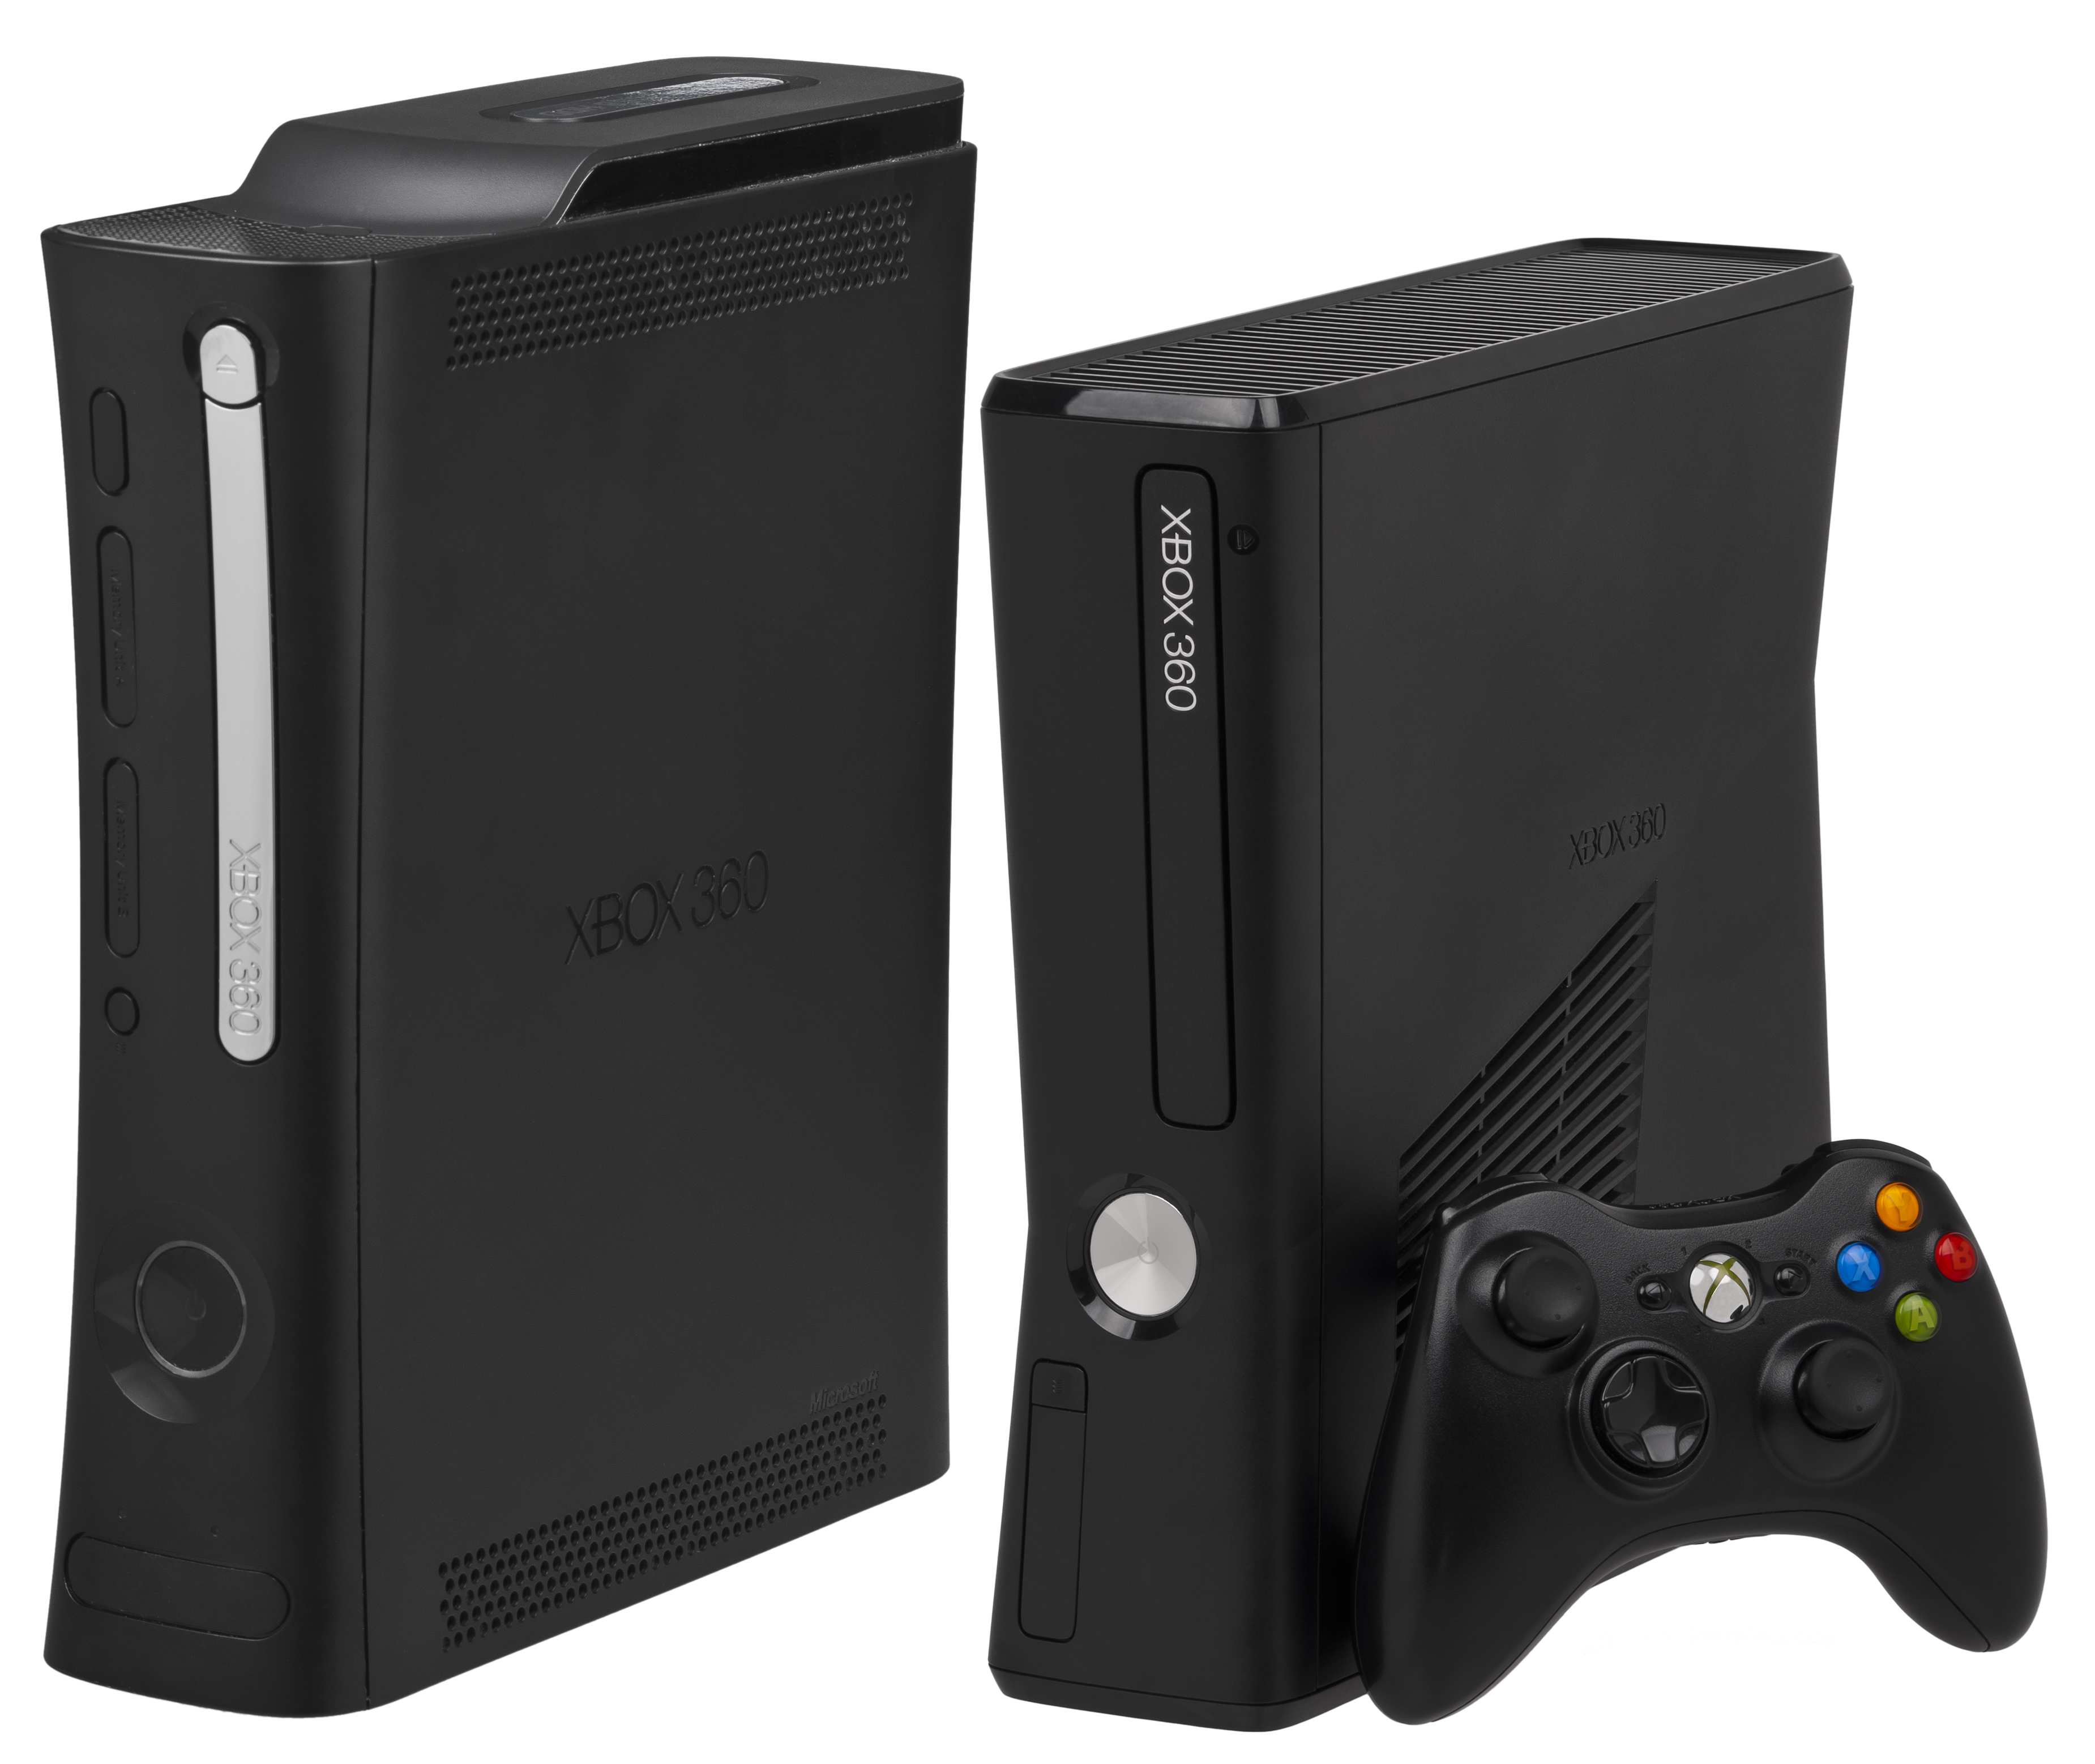 File:Xbox-360-Consoles-Infobox.png - Wikipedia, the free encyclopedia